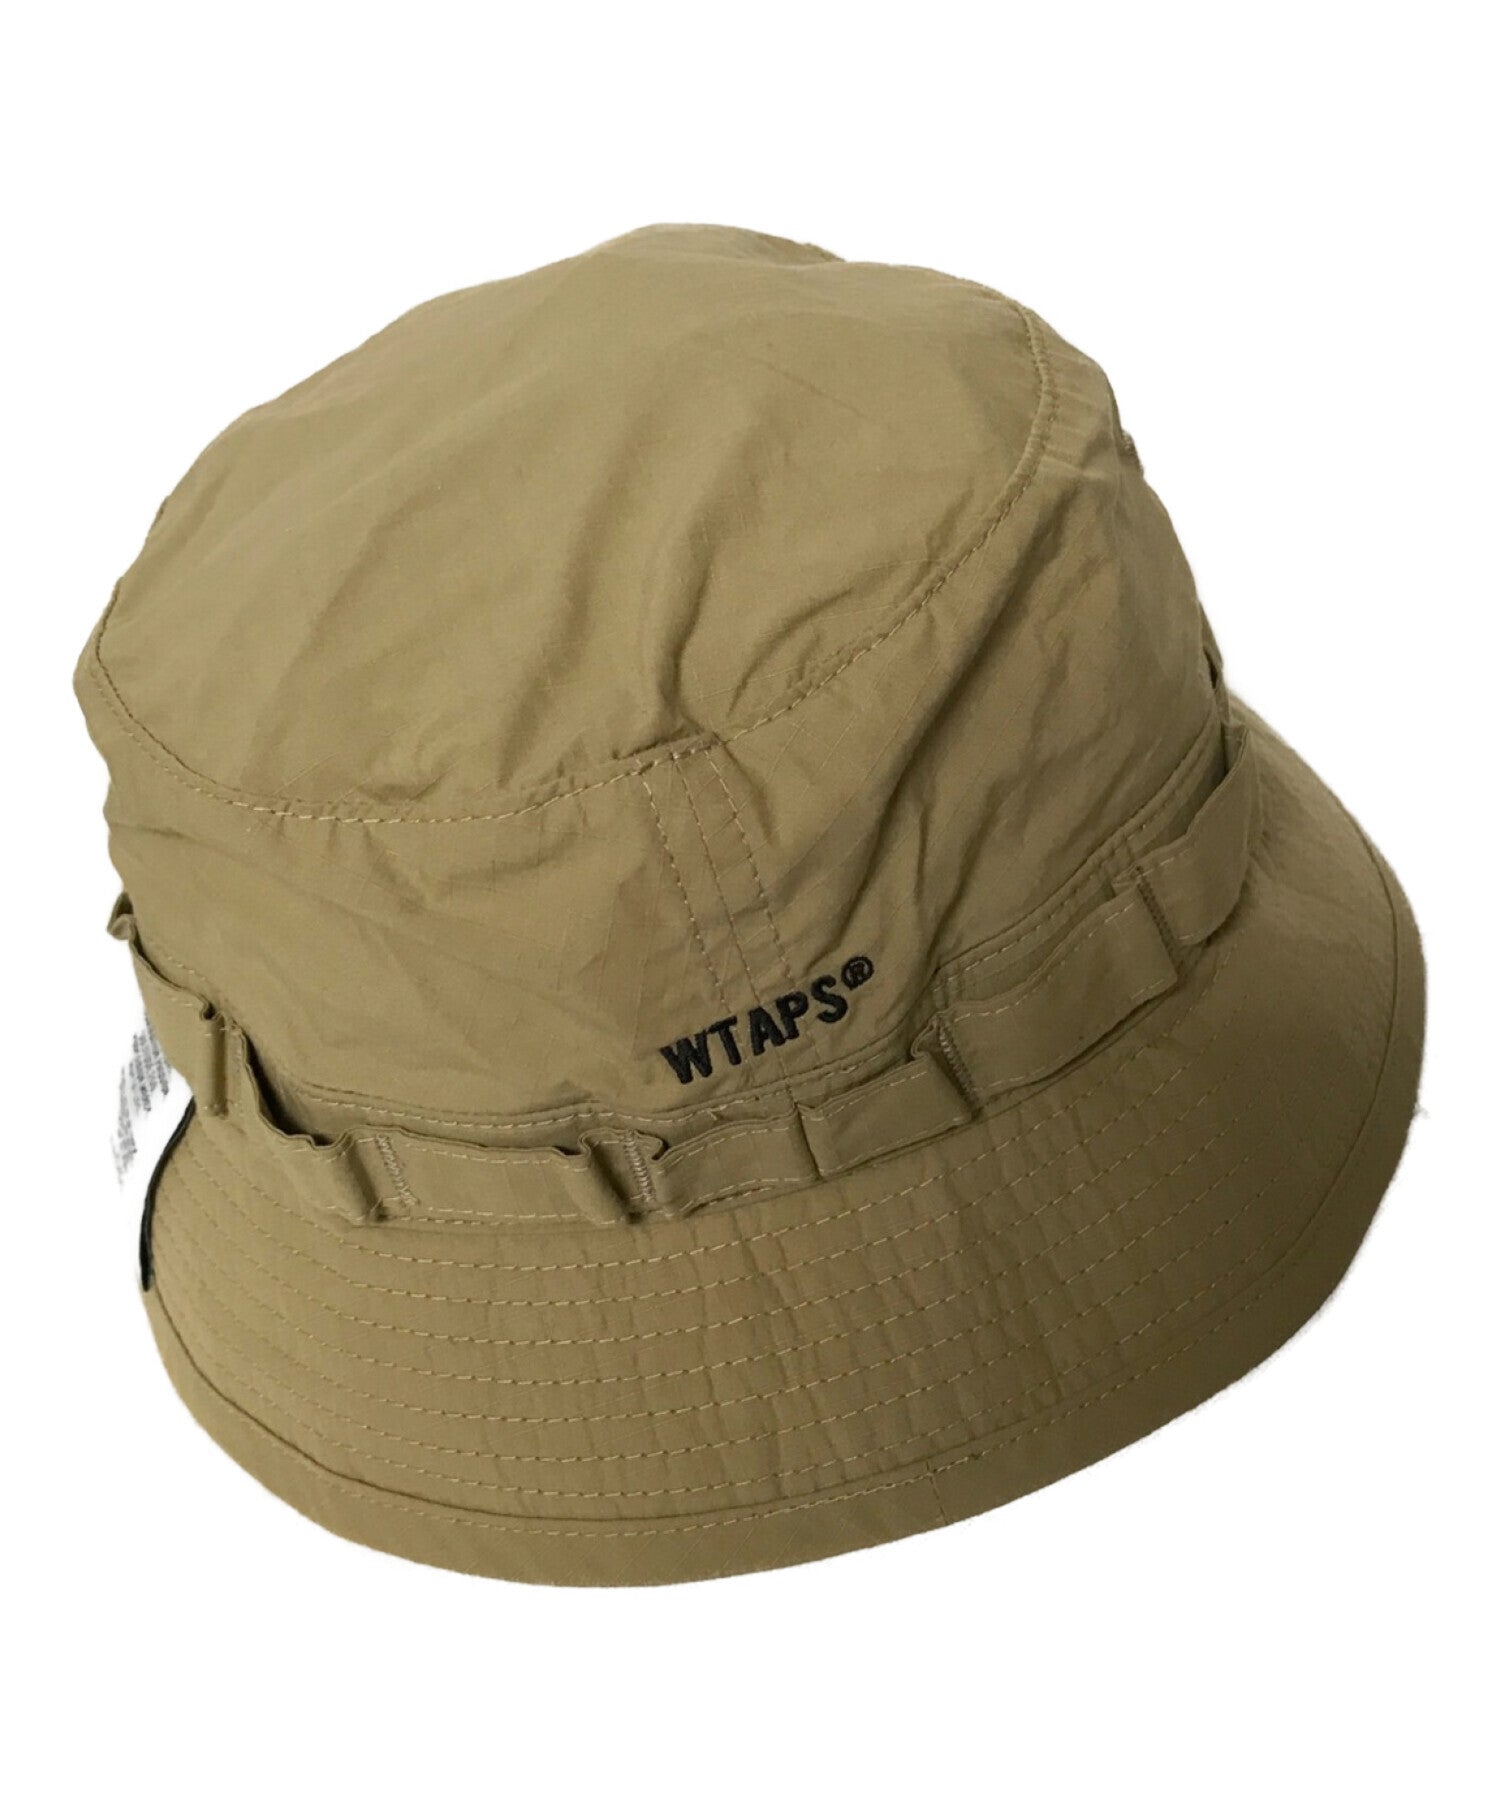 WTAPS 22SS JUNGLE 01 / HAT / NYCO.